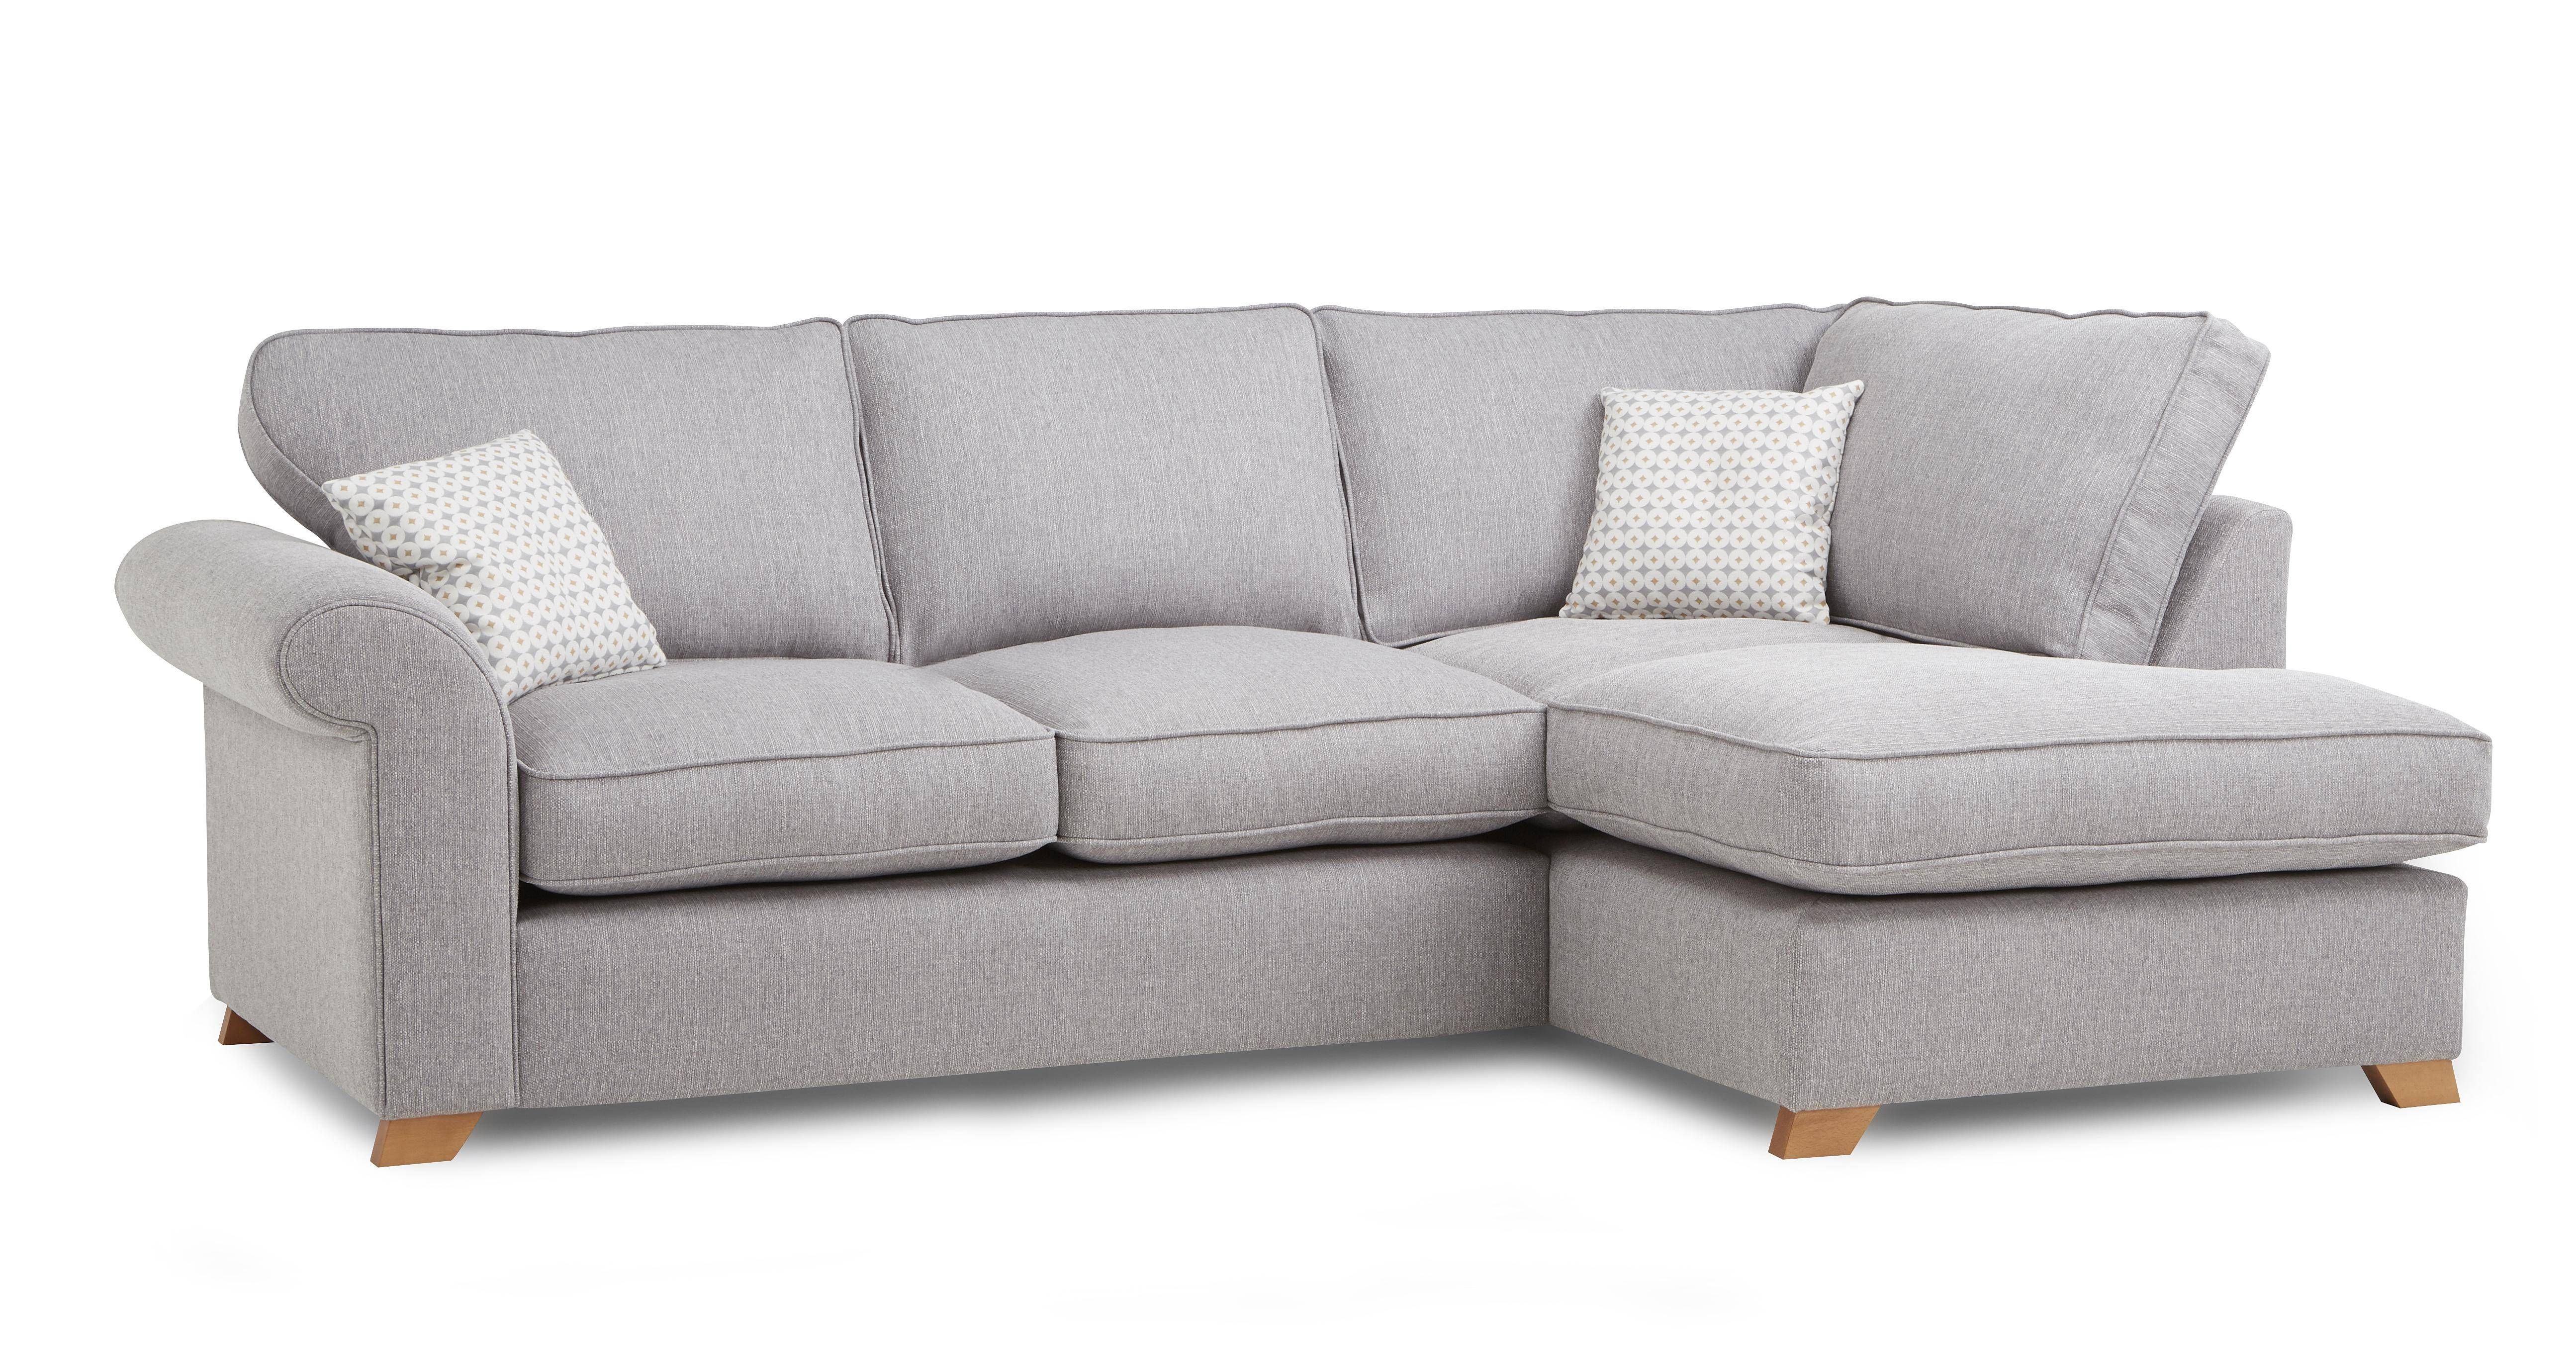 Sofas Center : Formidable Corner Sofa Picture Ideas Benano With Inside Cheap Corner Sofa Beds (View 7 of 30)